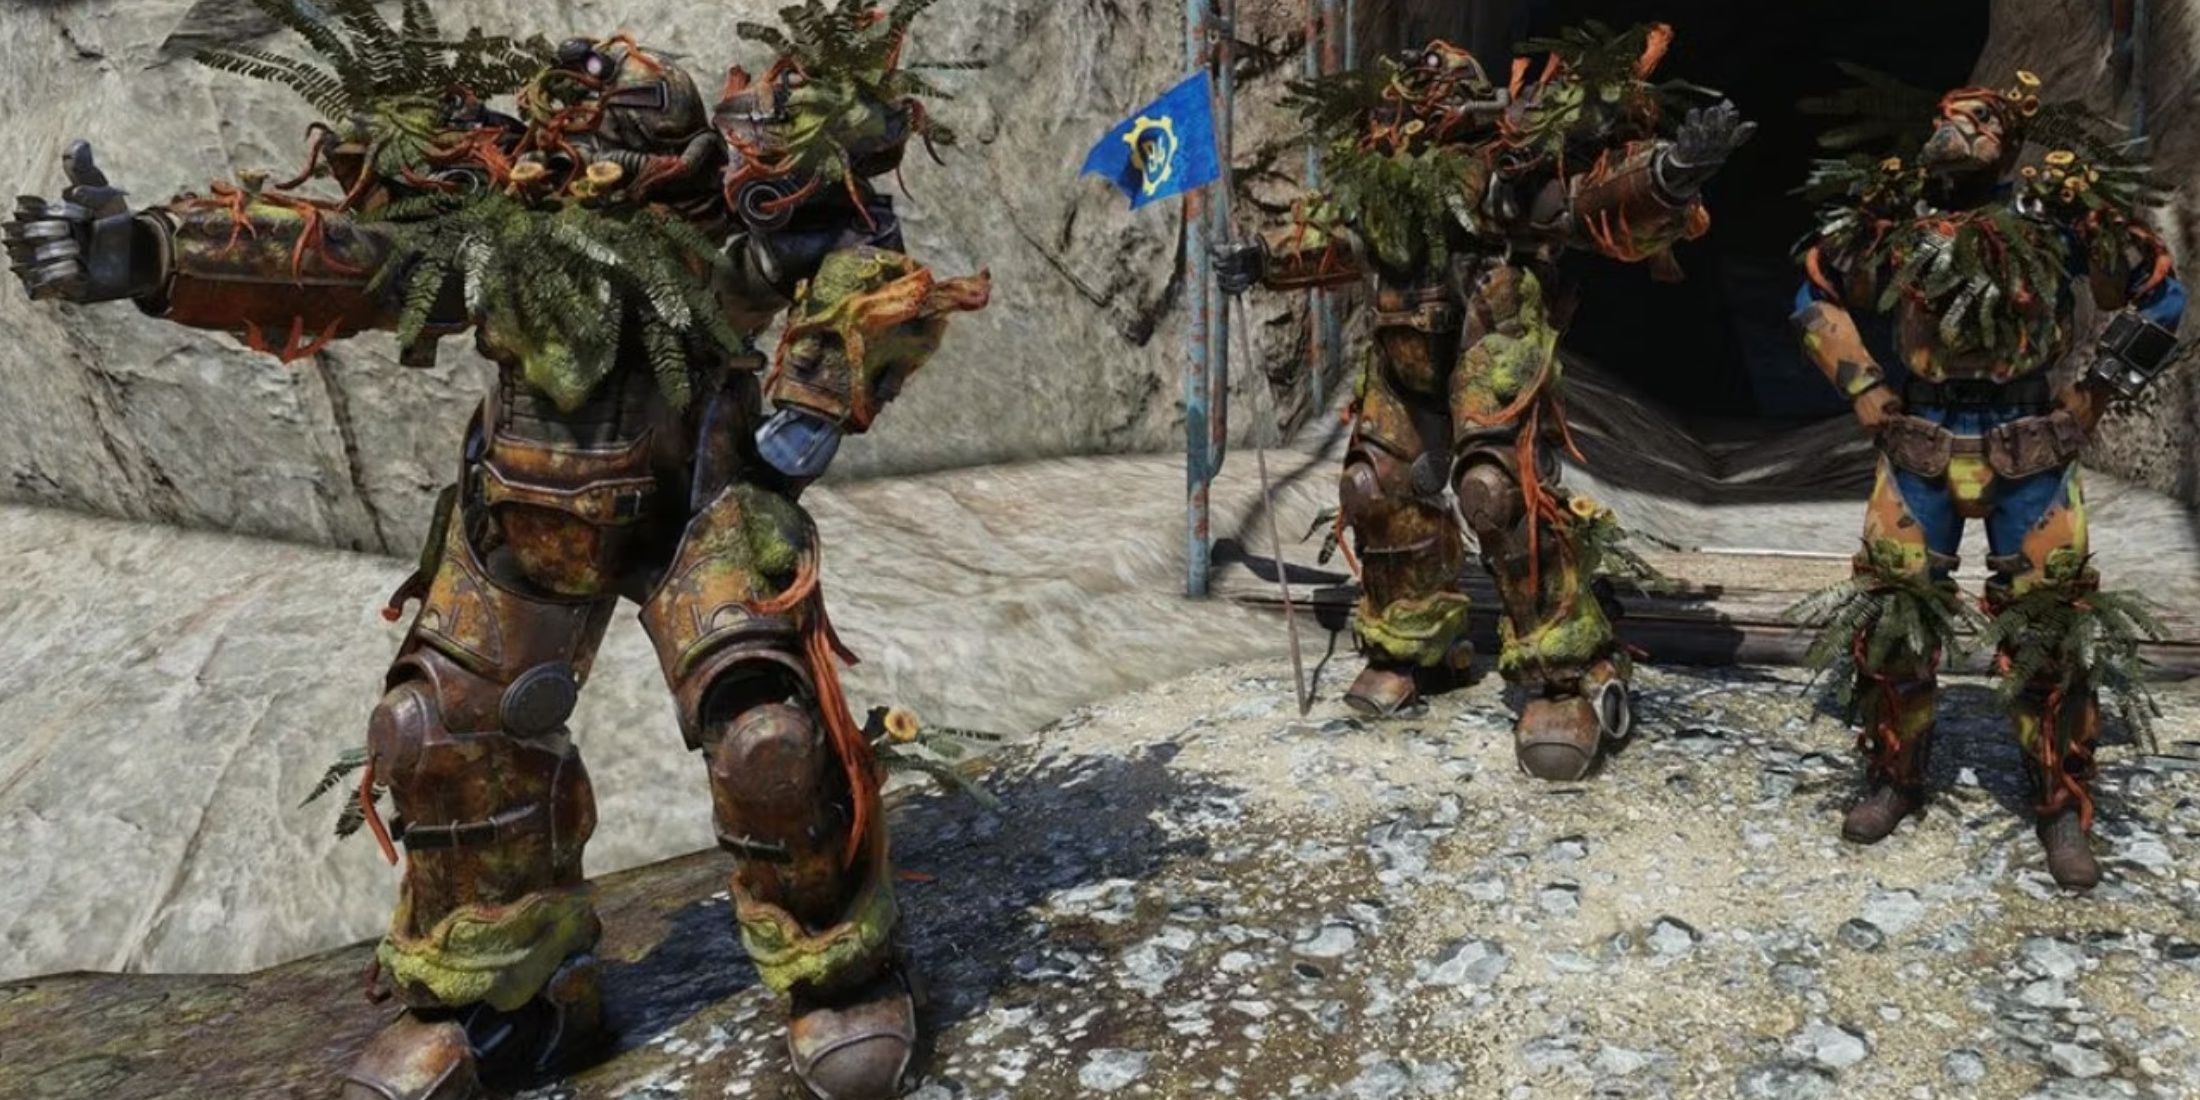 Fallout 76 Best Mutations Scaly Skin. Three people wearing scaly Power Armor.